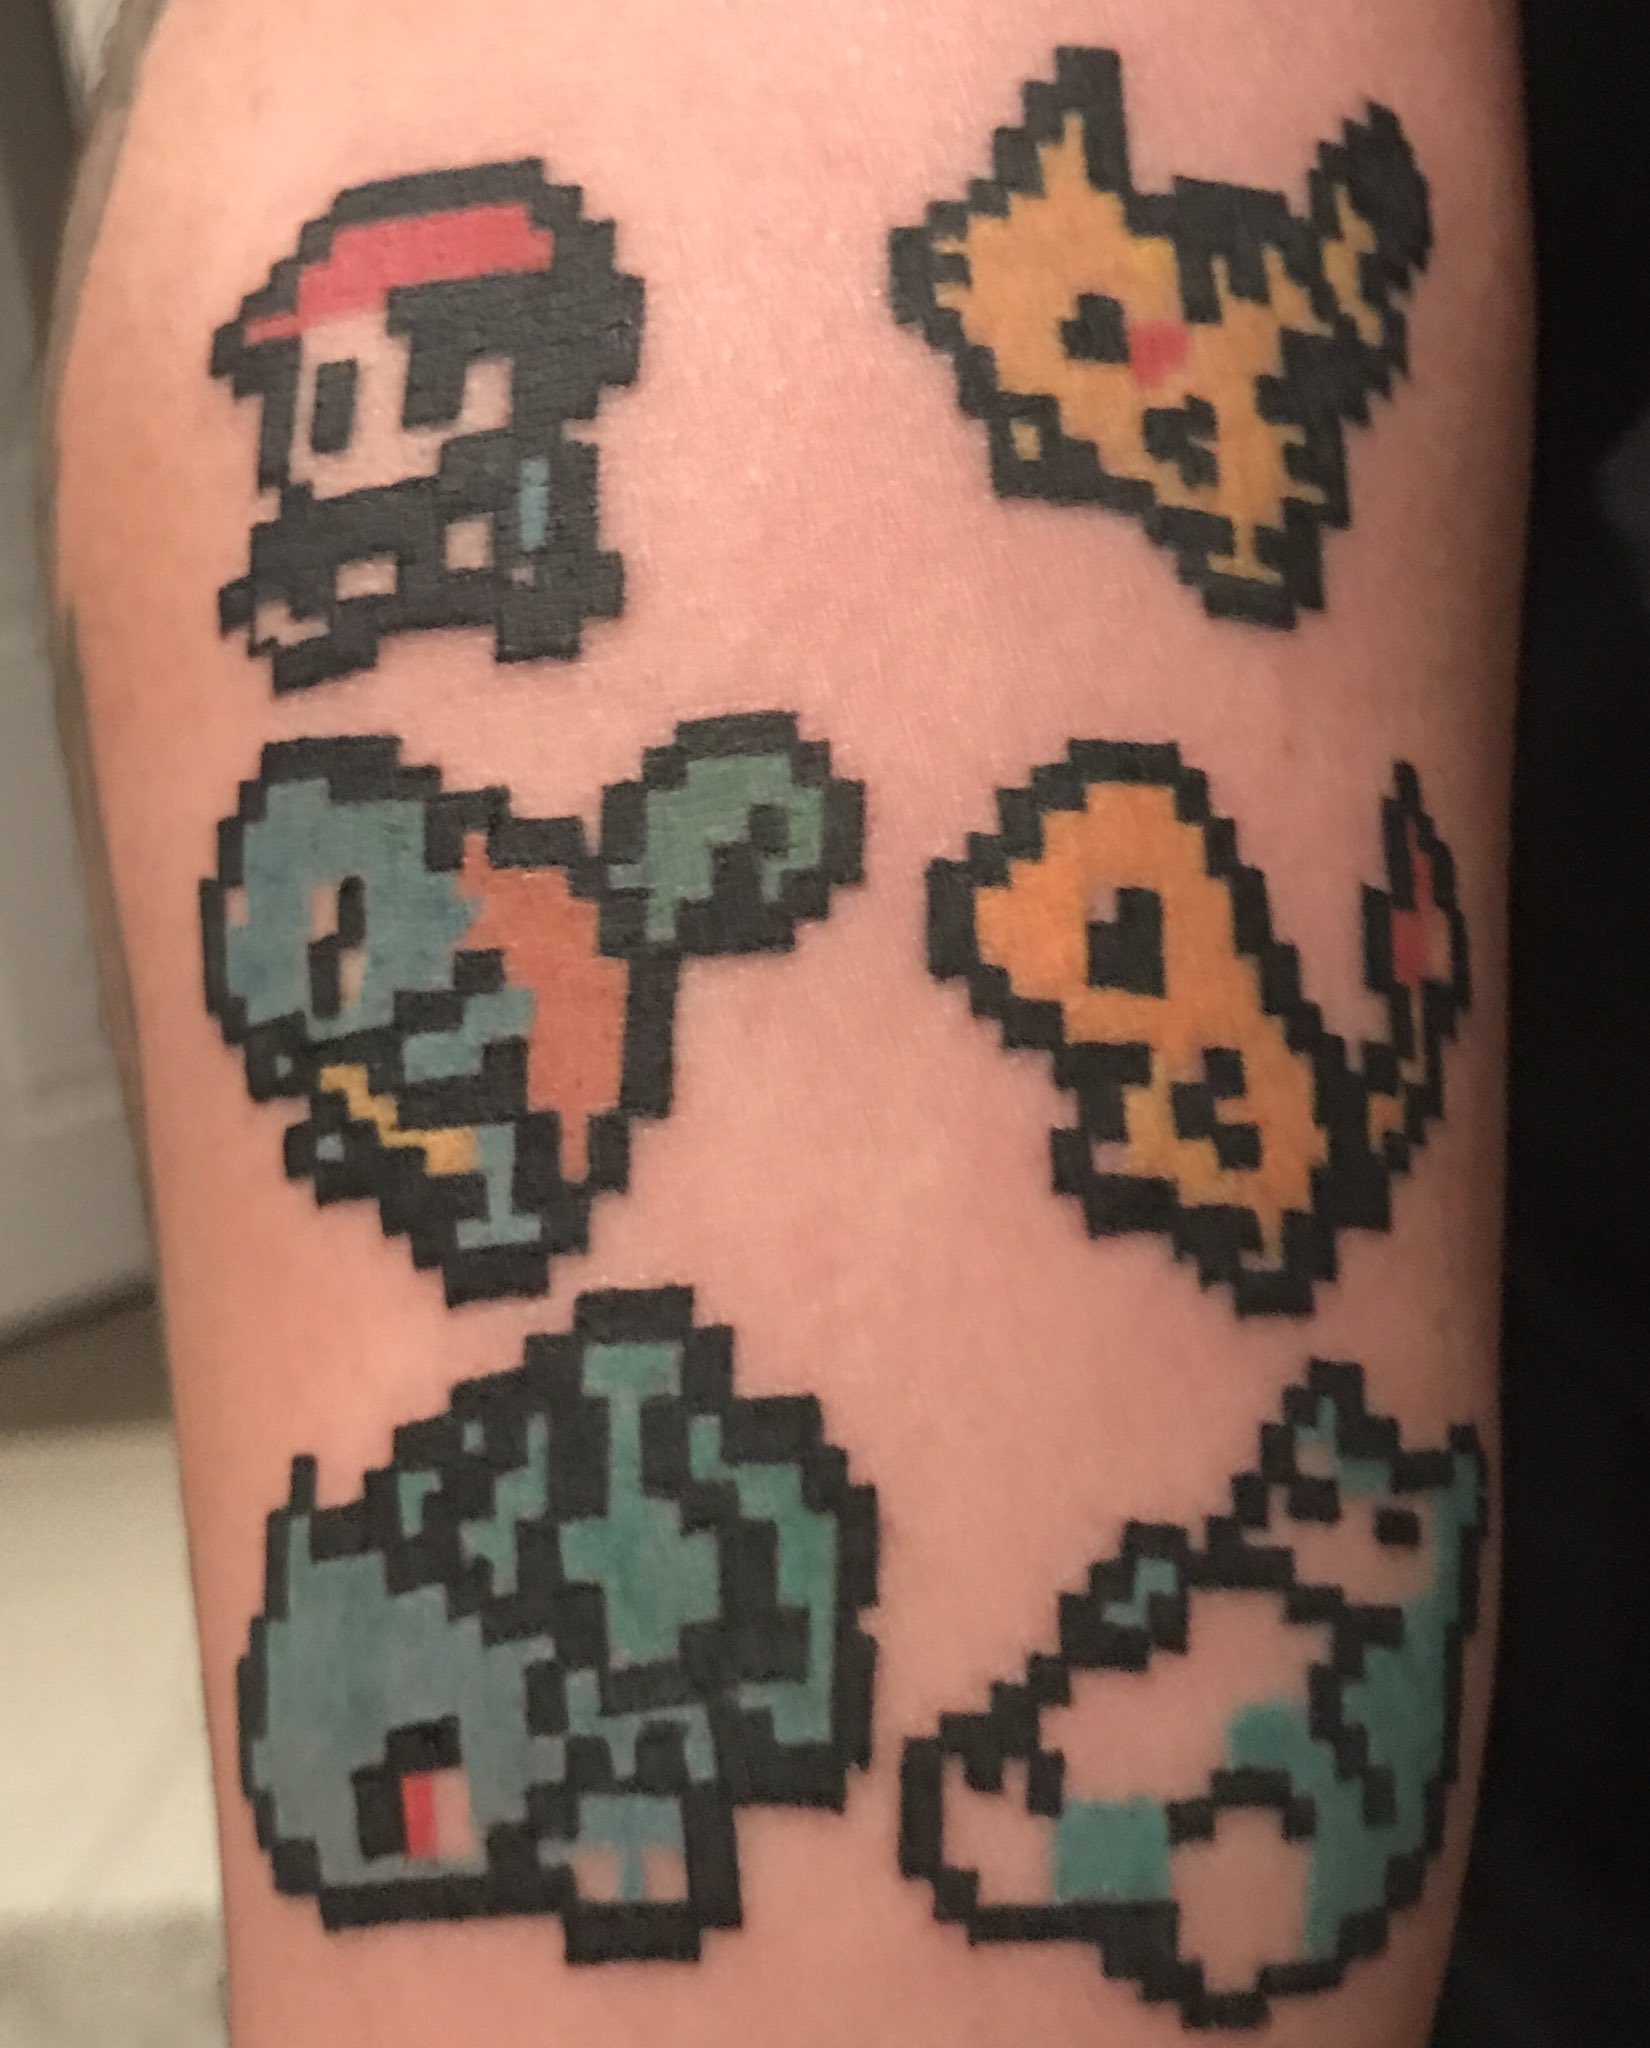 8BitPokemon on Twitter Check out these awesome tats tattoo pokemon  8bit eevee eeveelutions httpstco5mAPfcSYV4  Twitter